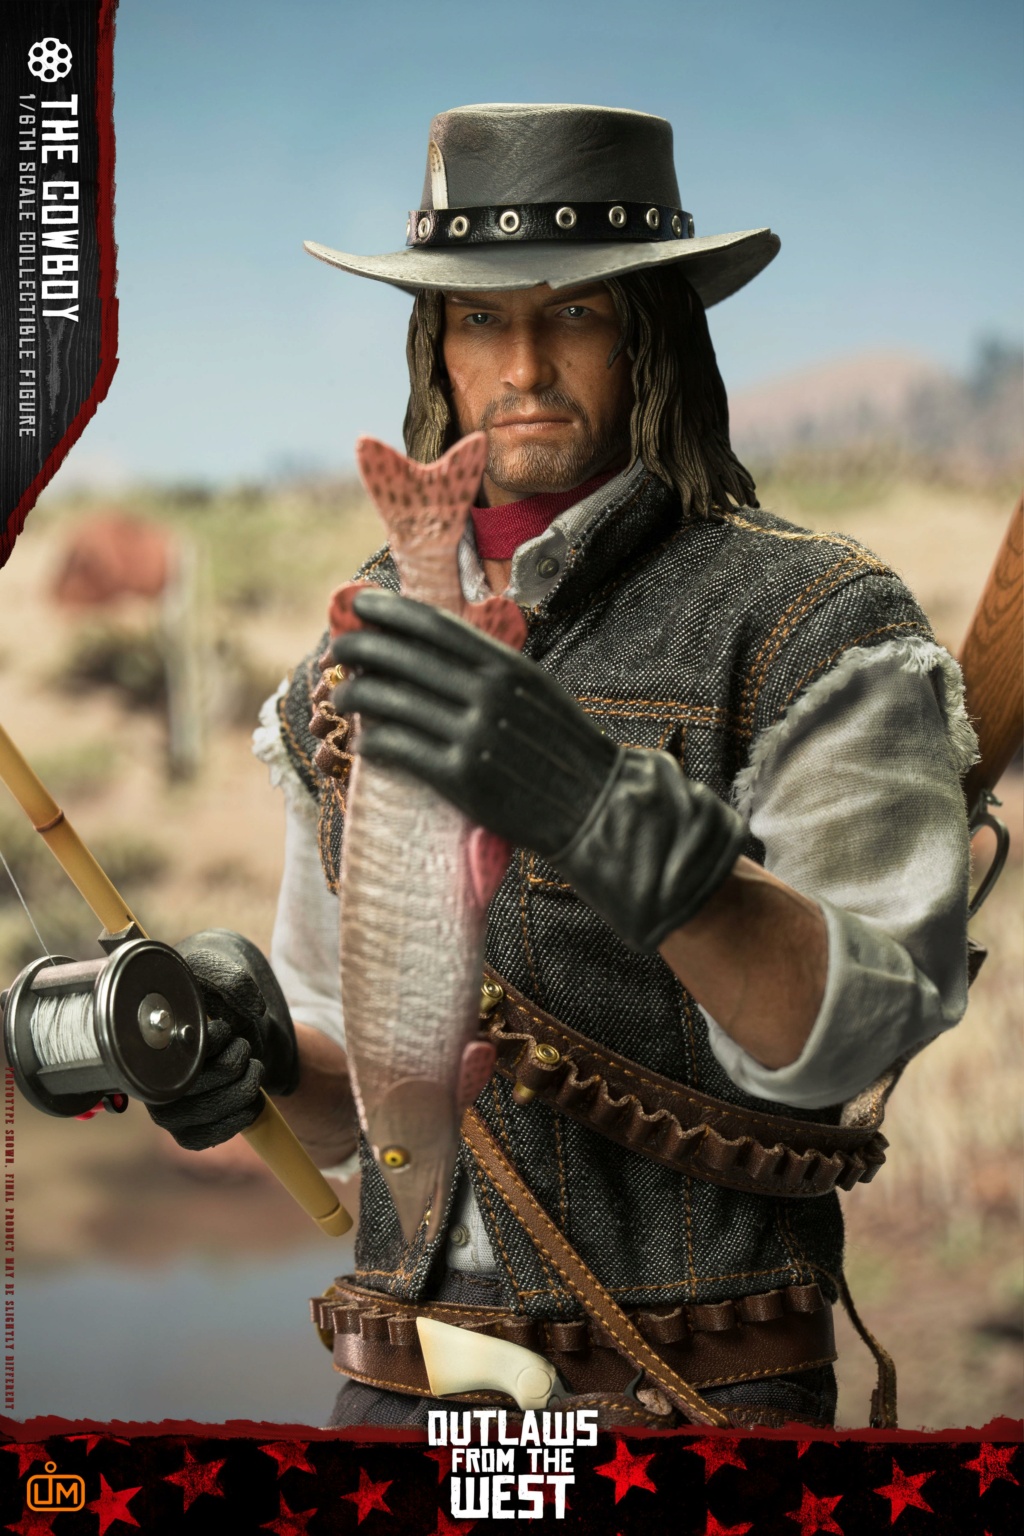 OutlawsOfTheWest - NEW PRODUCT: LIM TOYS: Outlaws of the West Series: The Cowboy 1/6 scale action figure 41695010